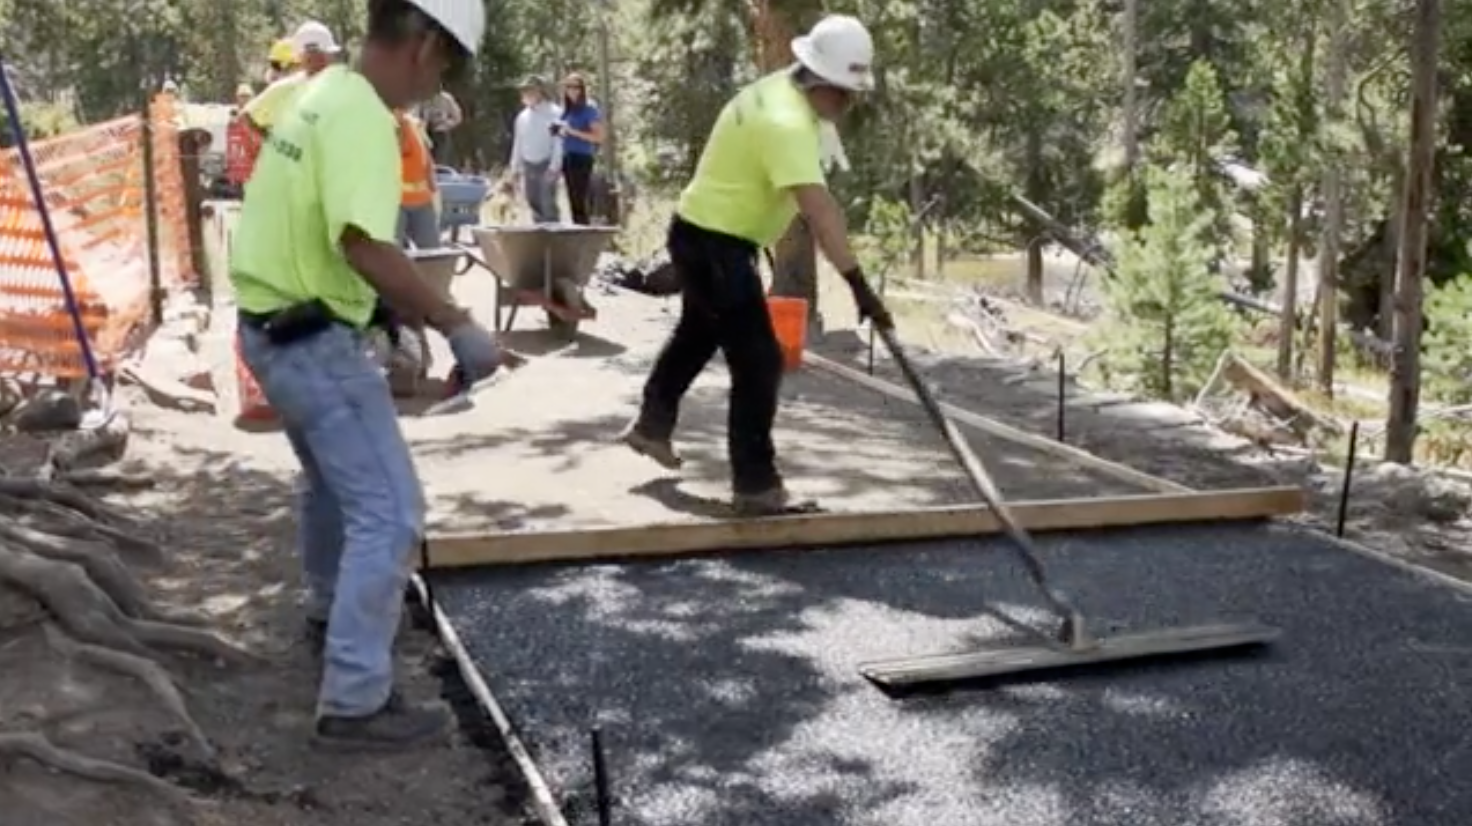 New Pavement Made From Tyres Will Save Old Faithful’s Groundwater